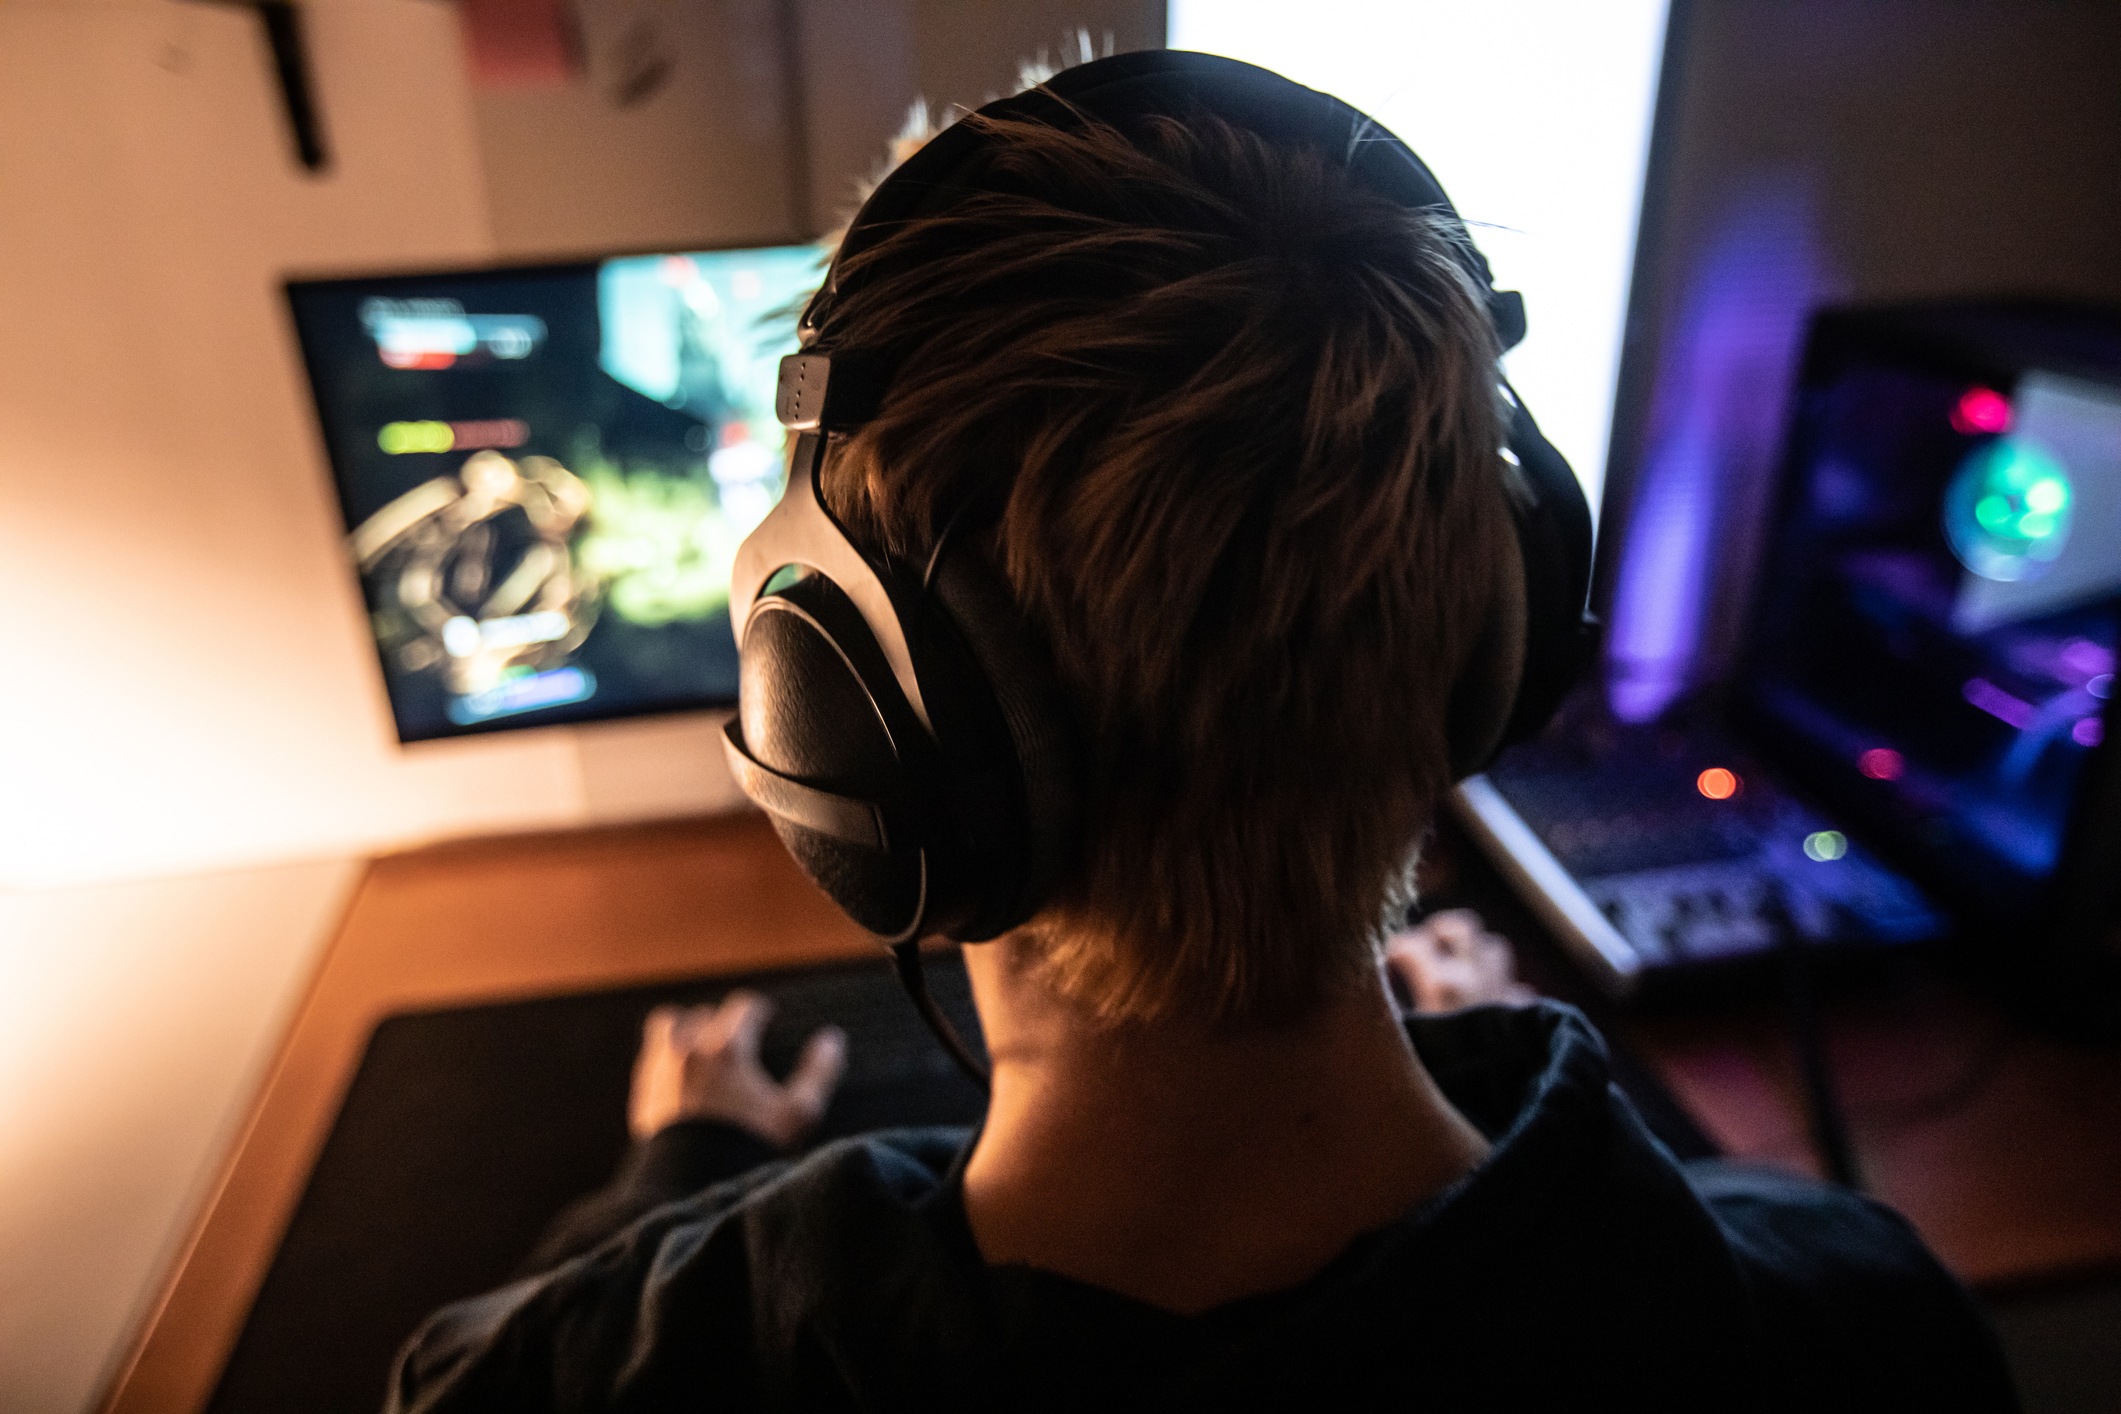 Online Gaming Communities Could Provide A Lifeline For Isolated Young Men